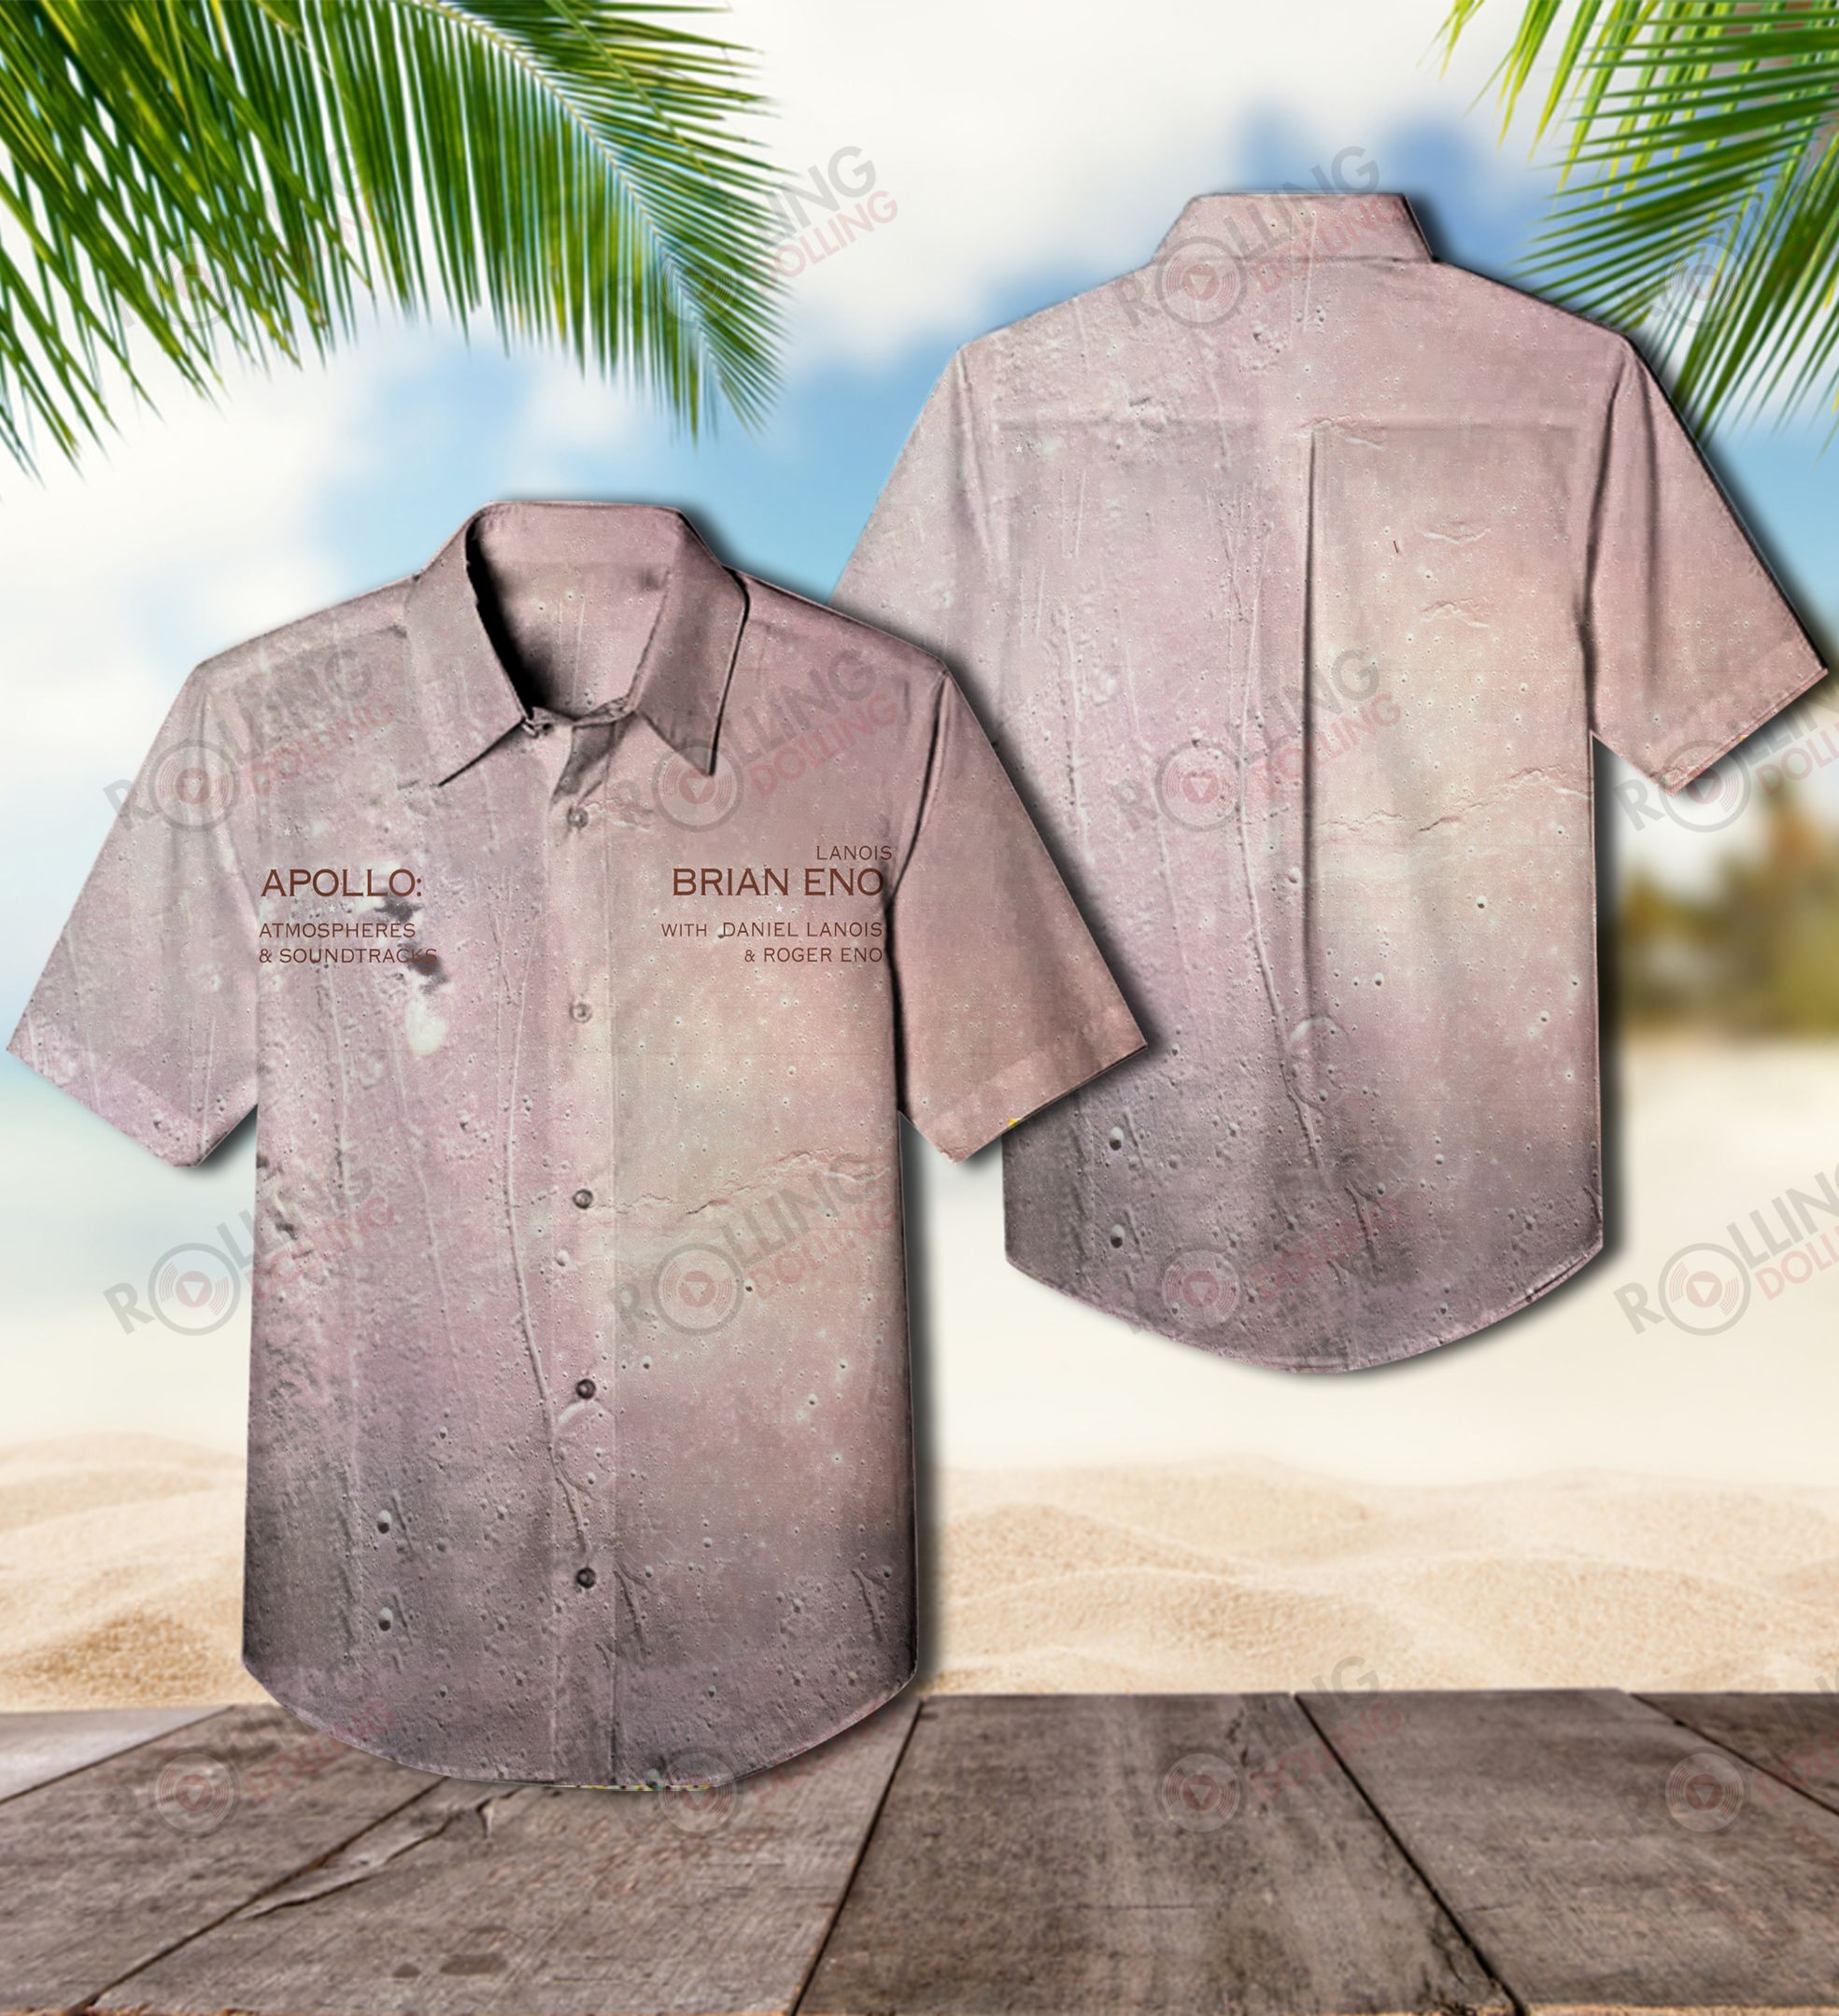 This would make a great gift for any fan who loves Hawaiian Shirt as well as Rock band 29